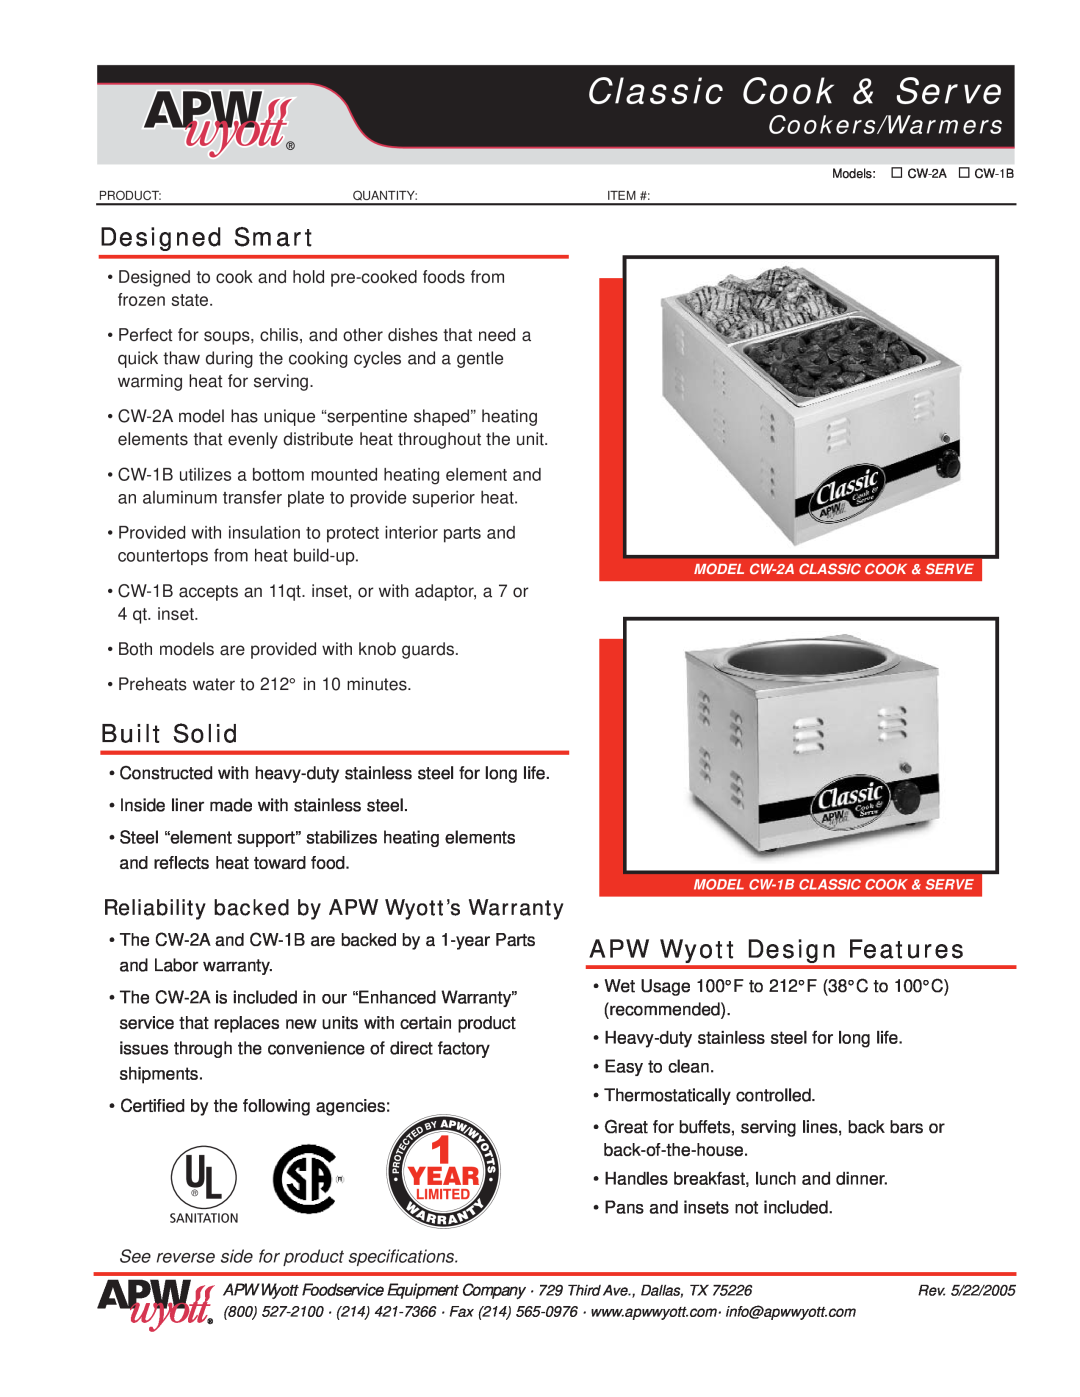 APW Wyott CW-1B warranty Classic Cook & Serve, Cookers/Warmers, Designed Smart, Built Solid, APW Wyott Design Features 